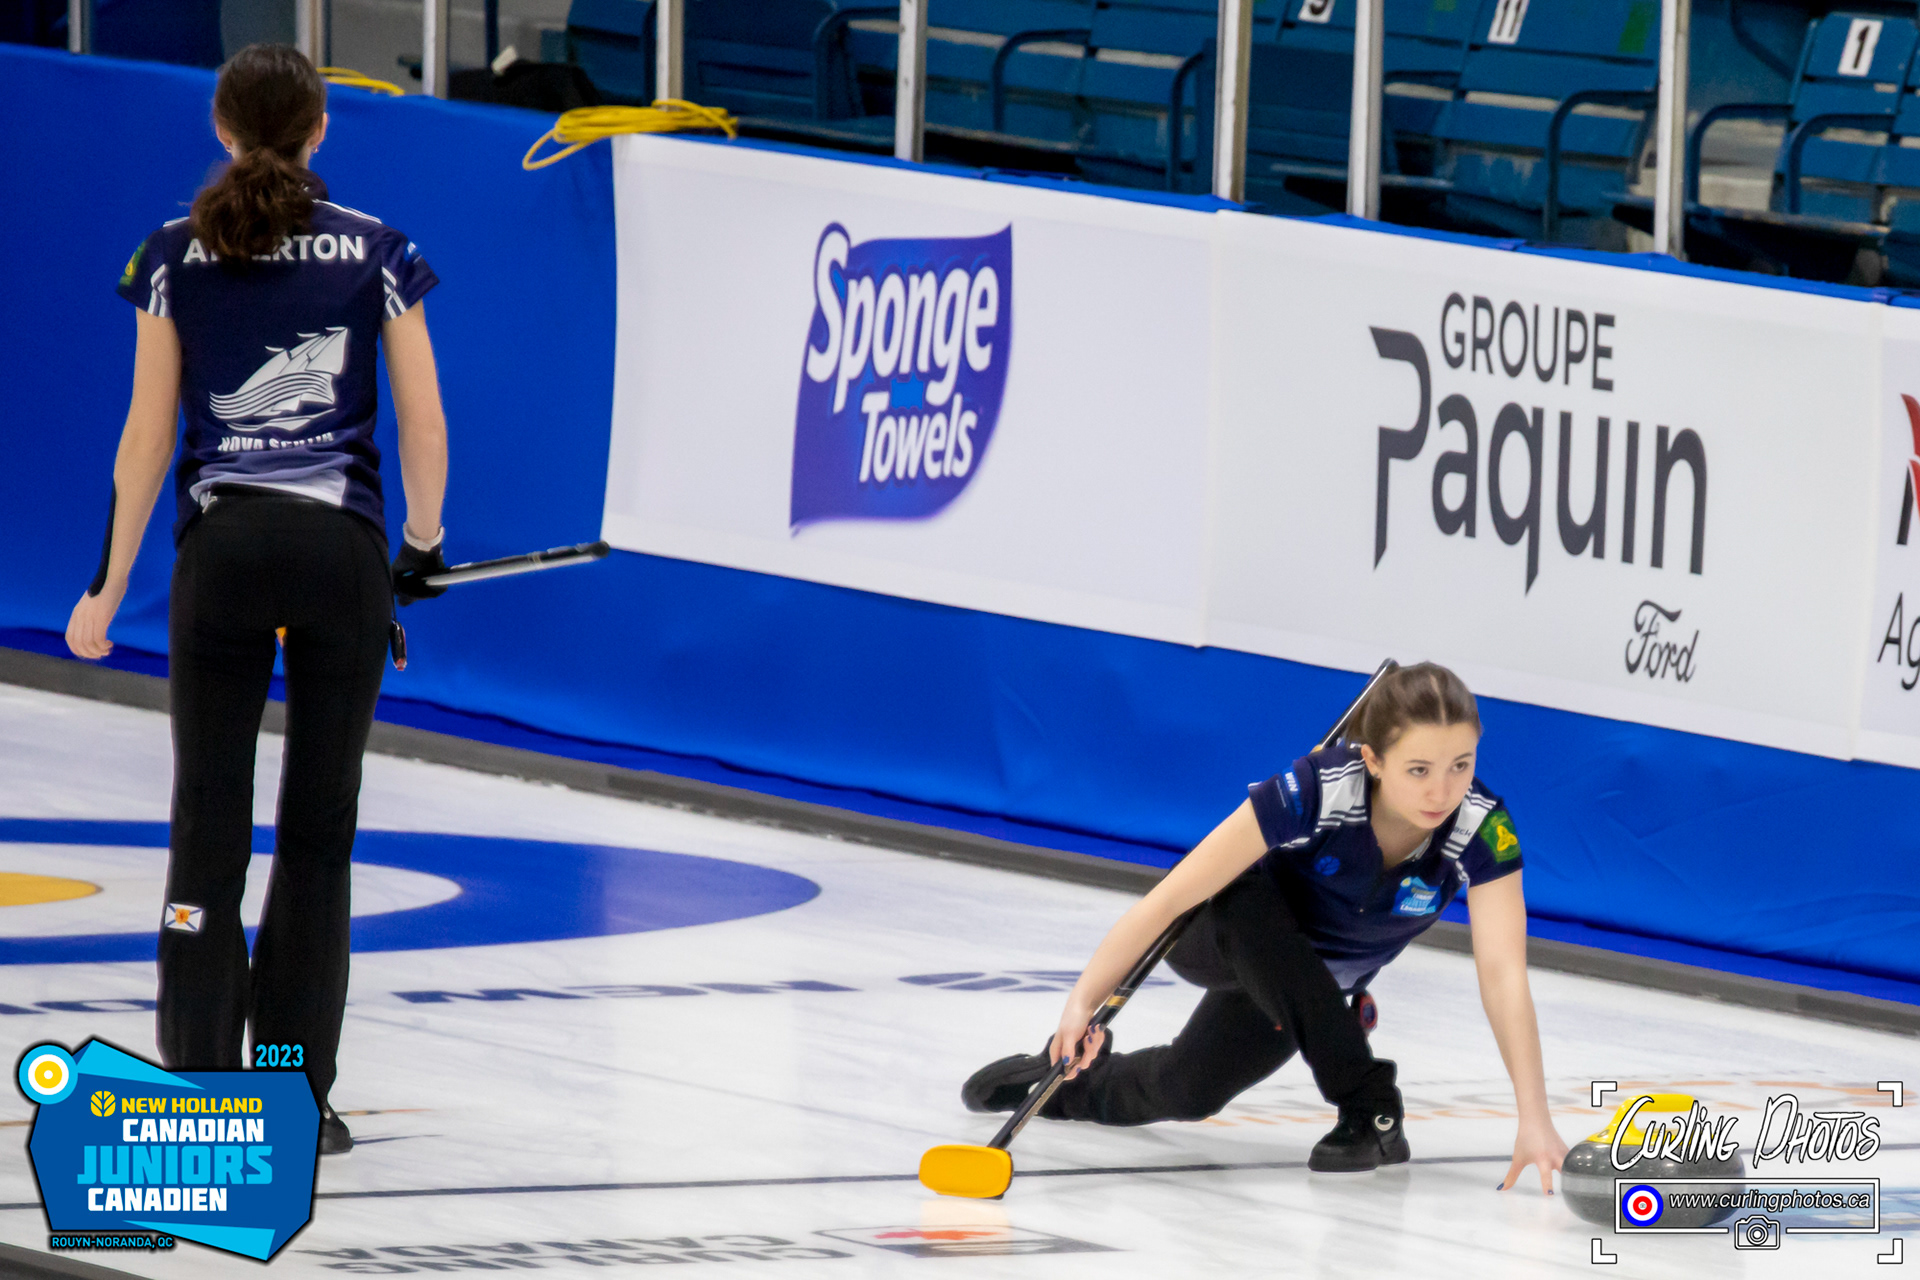 New Holland Canadian Junior Curling Championships - SWSCD